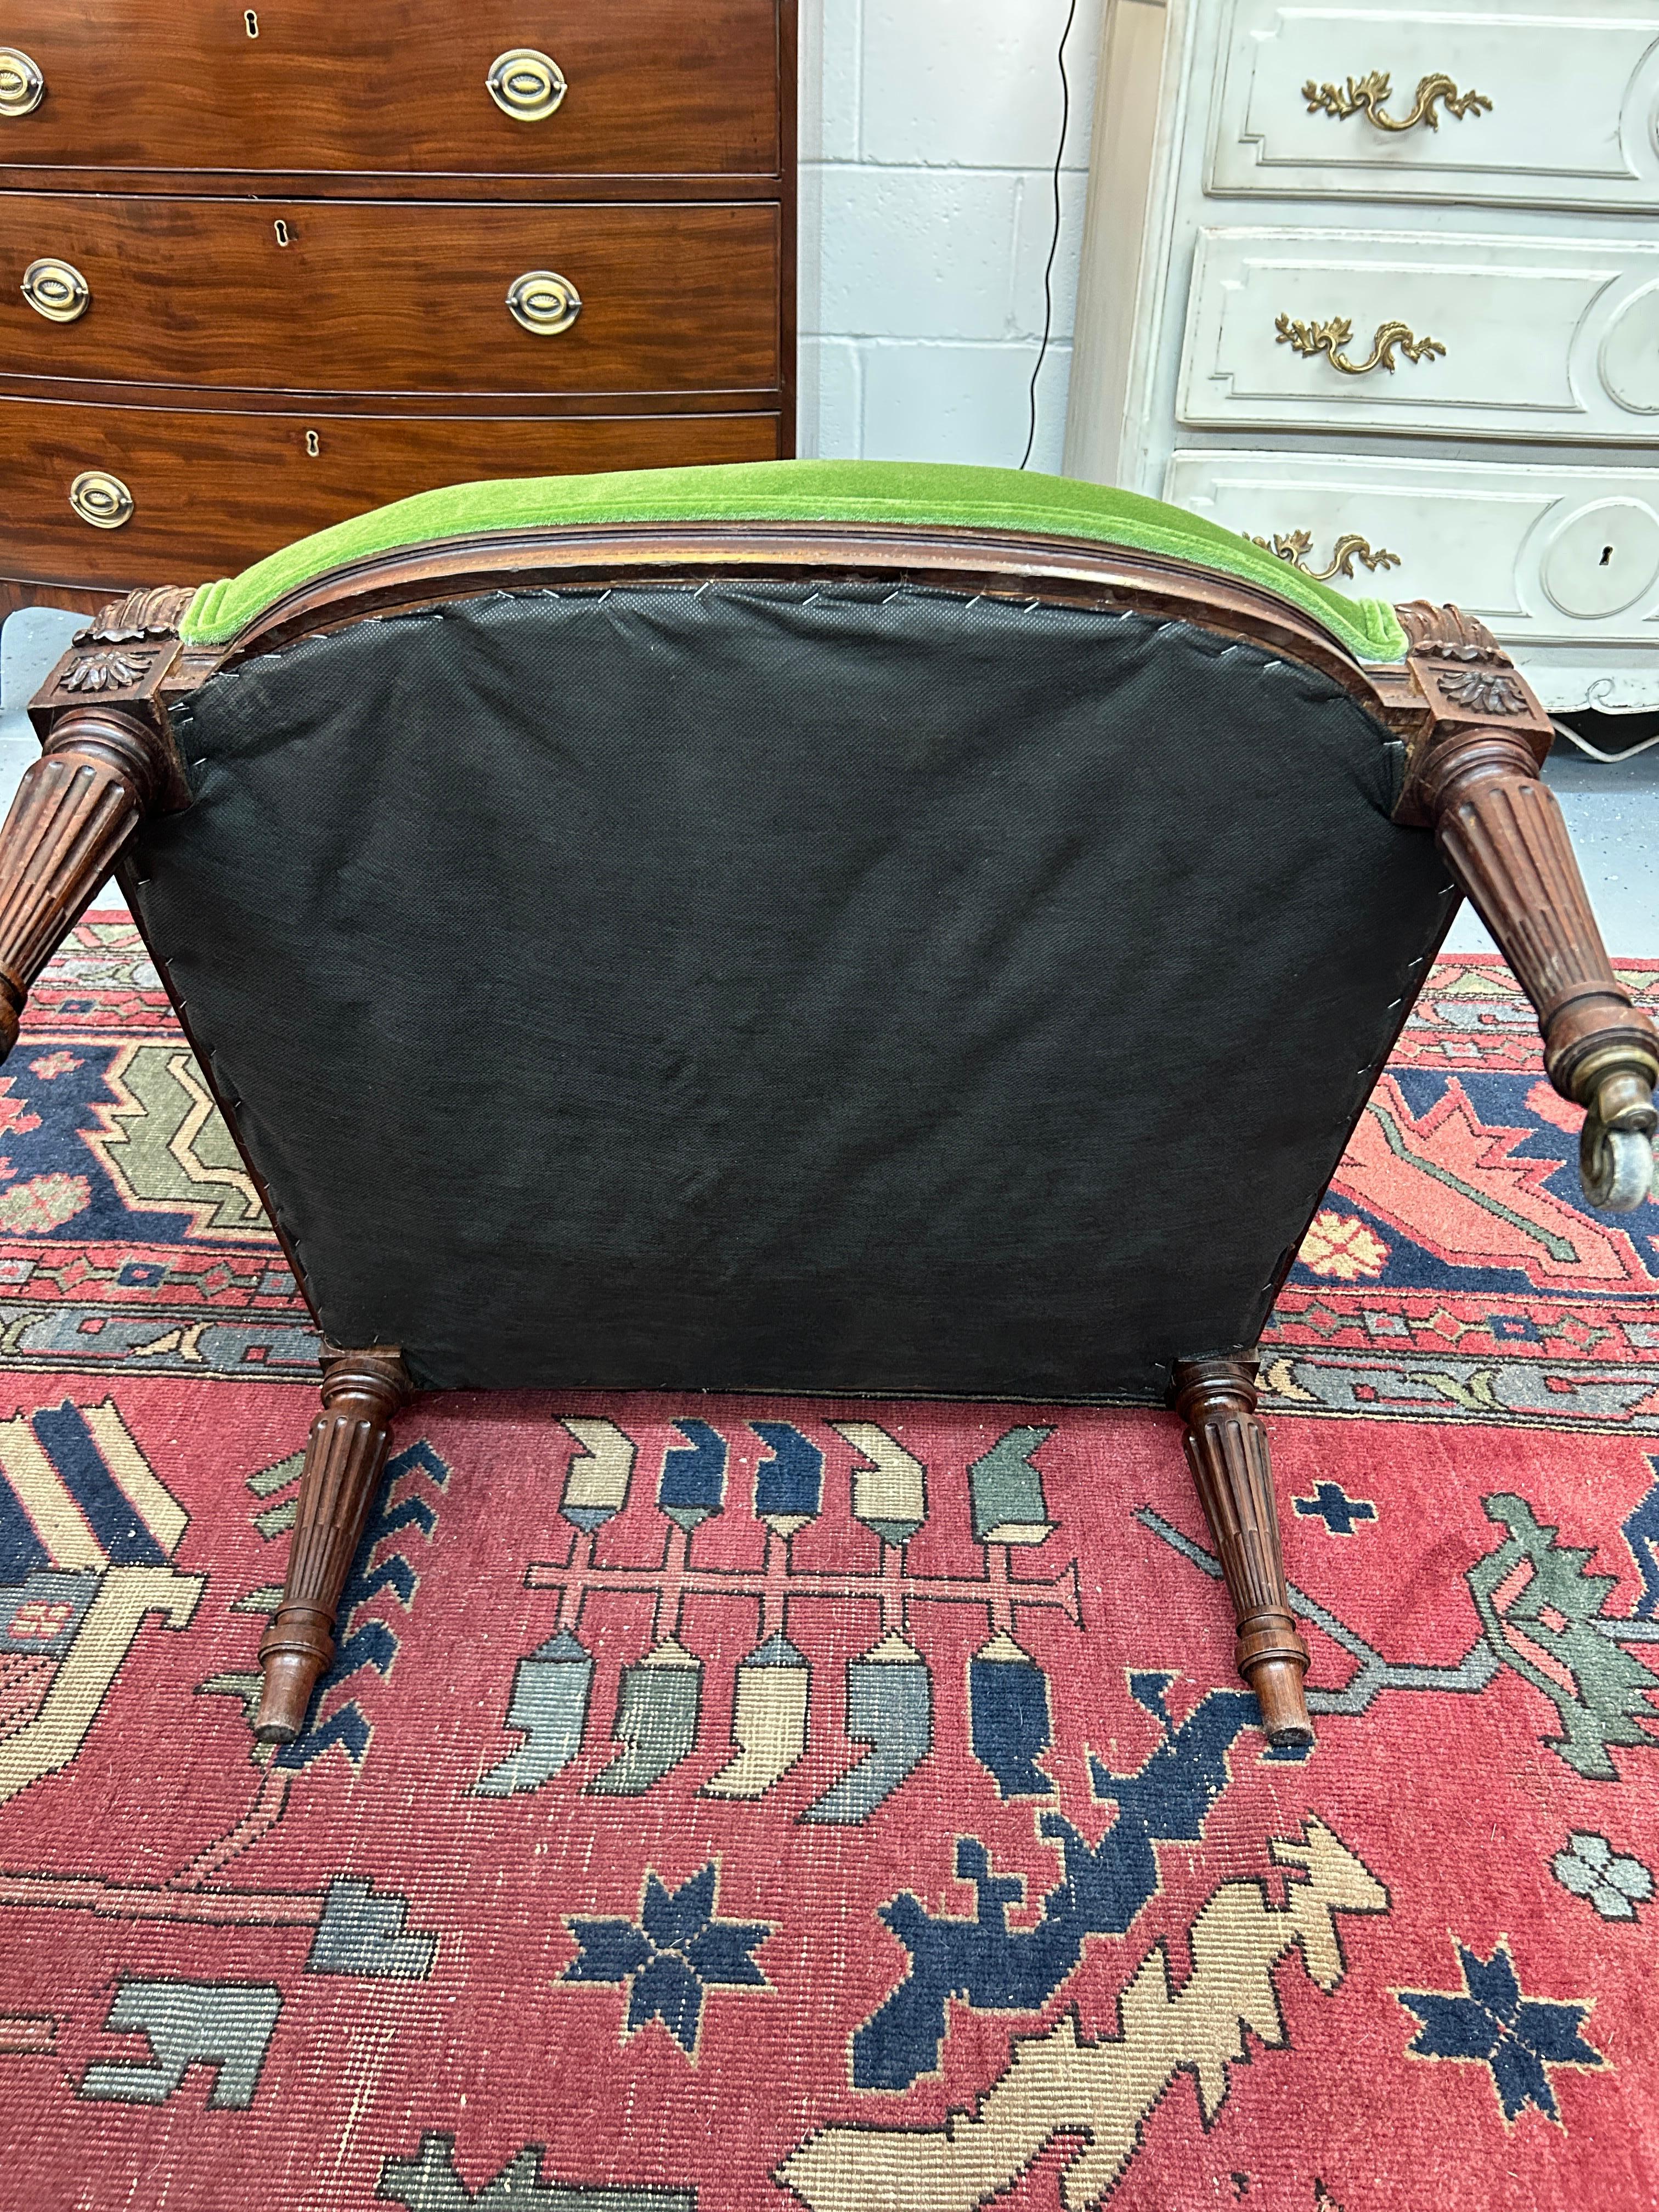 19th Century French Bergere Rosewood Arm Chair  For Sale 4